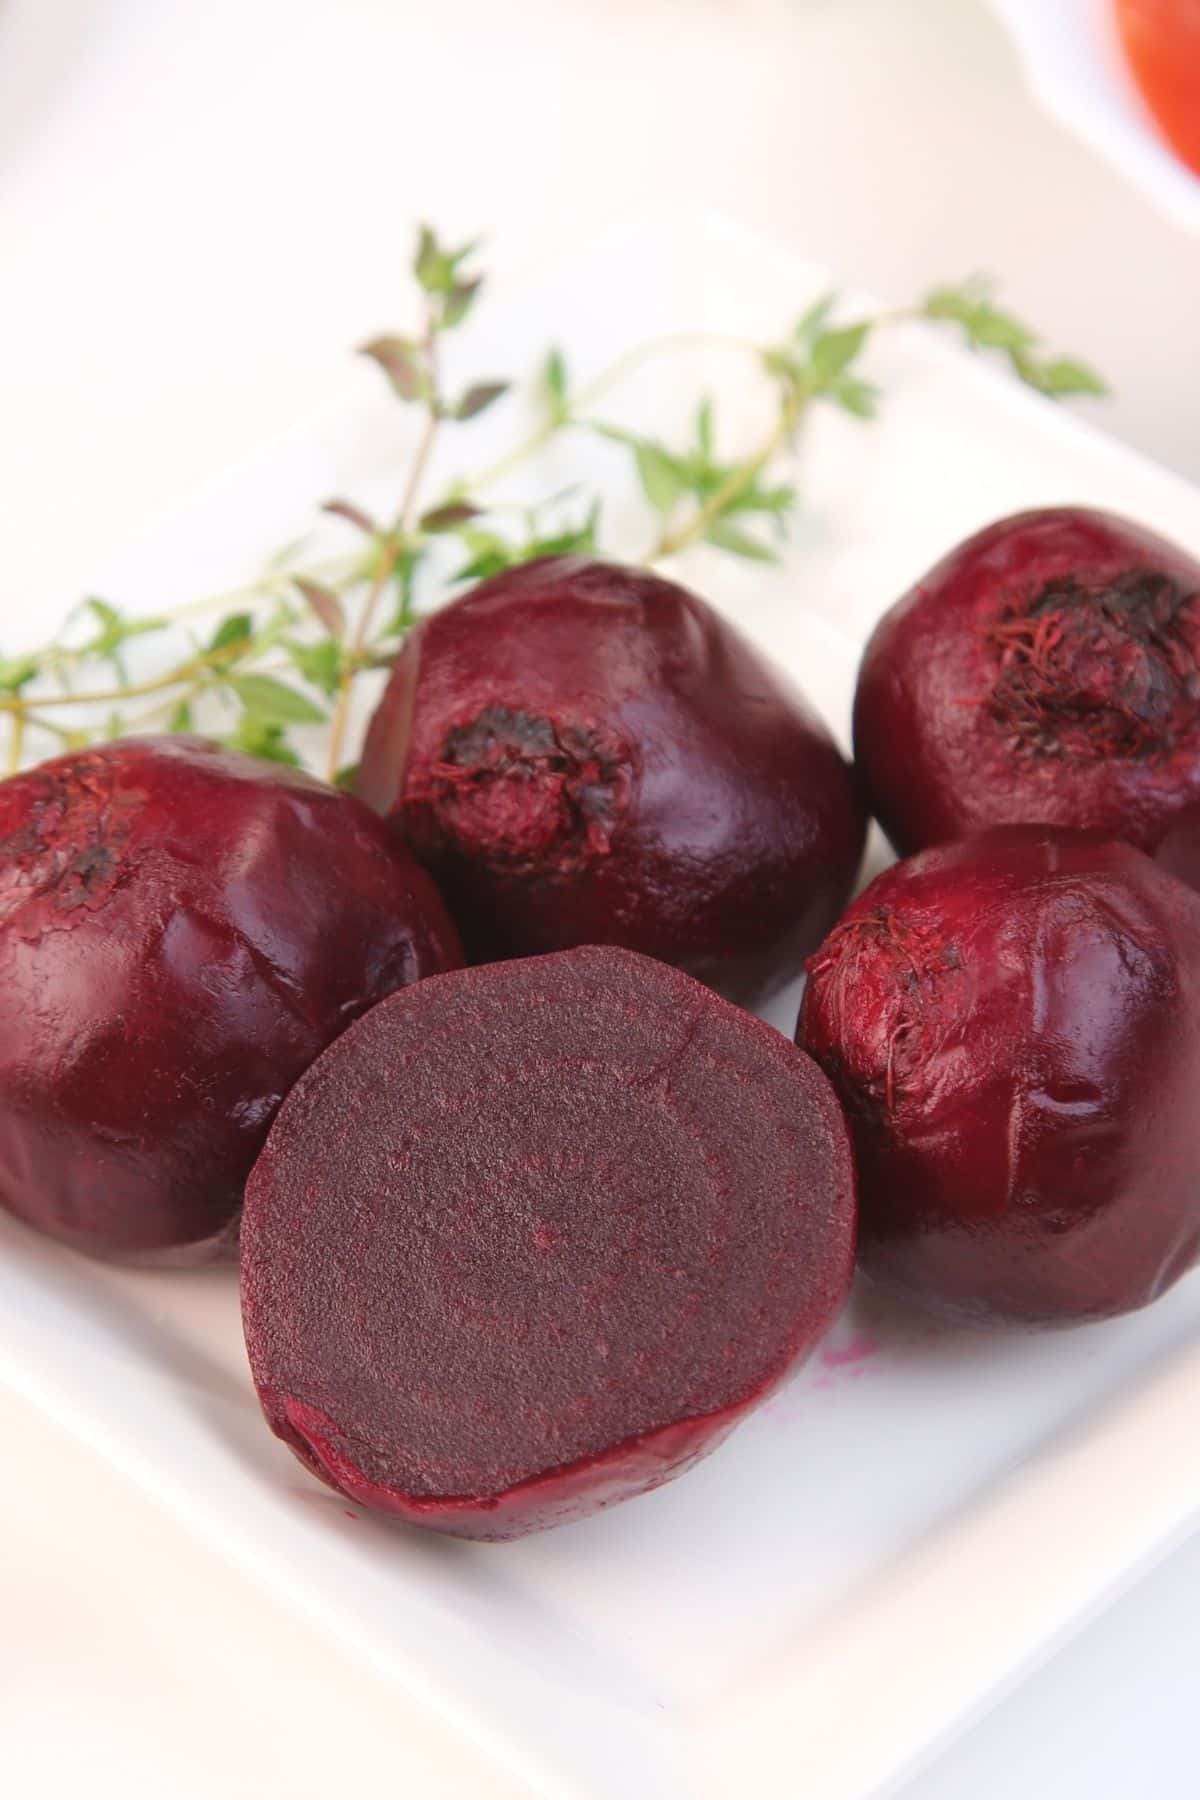 instant pot red beets served whole on a white plate